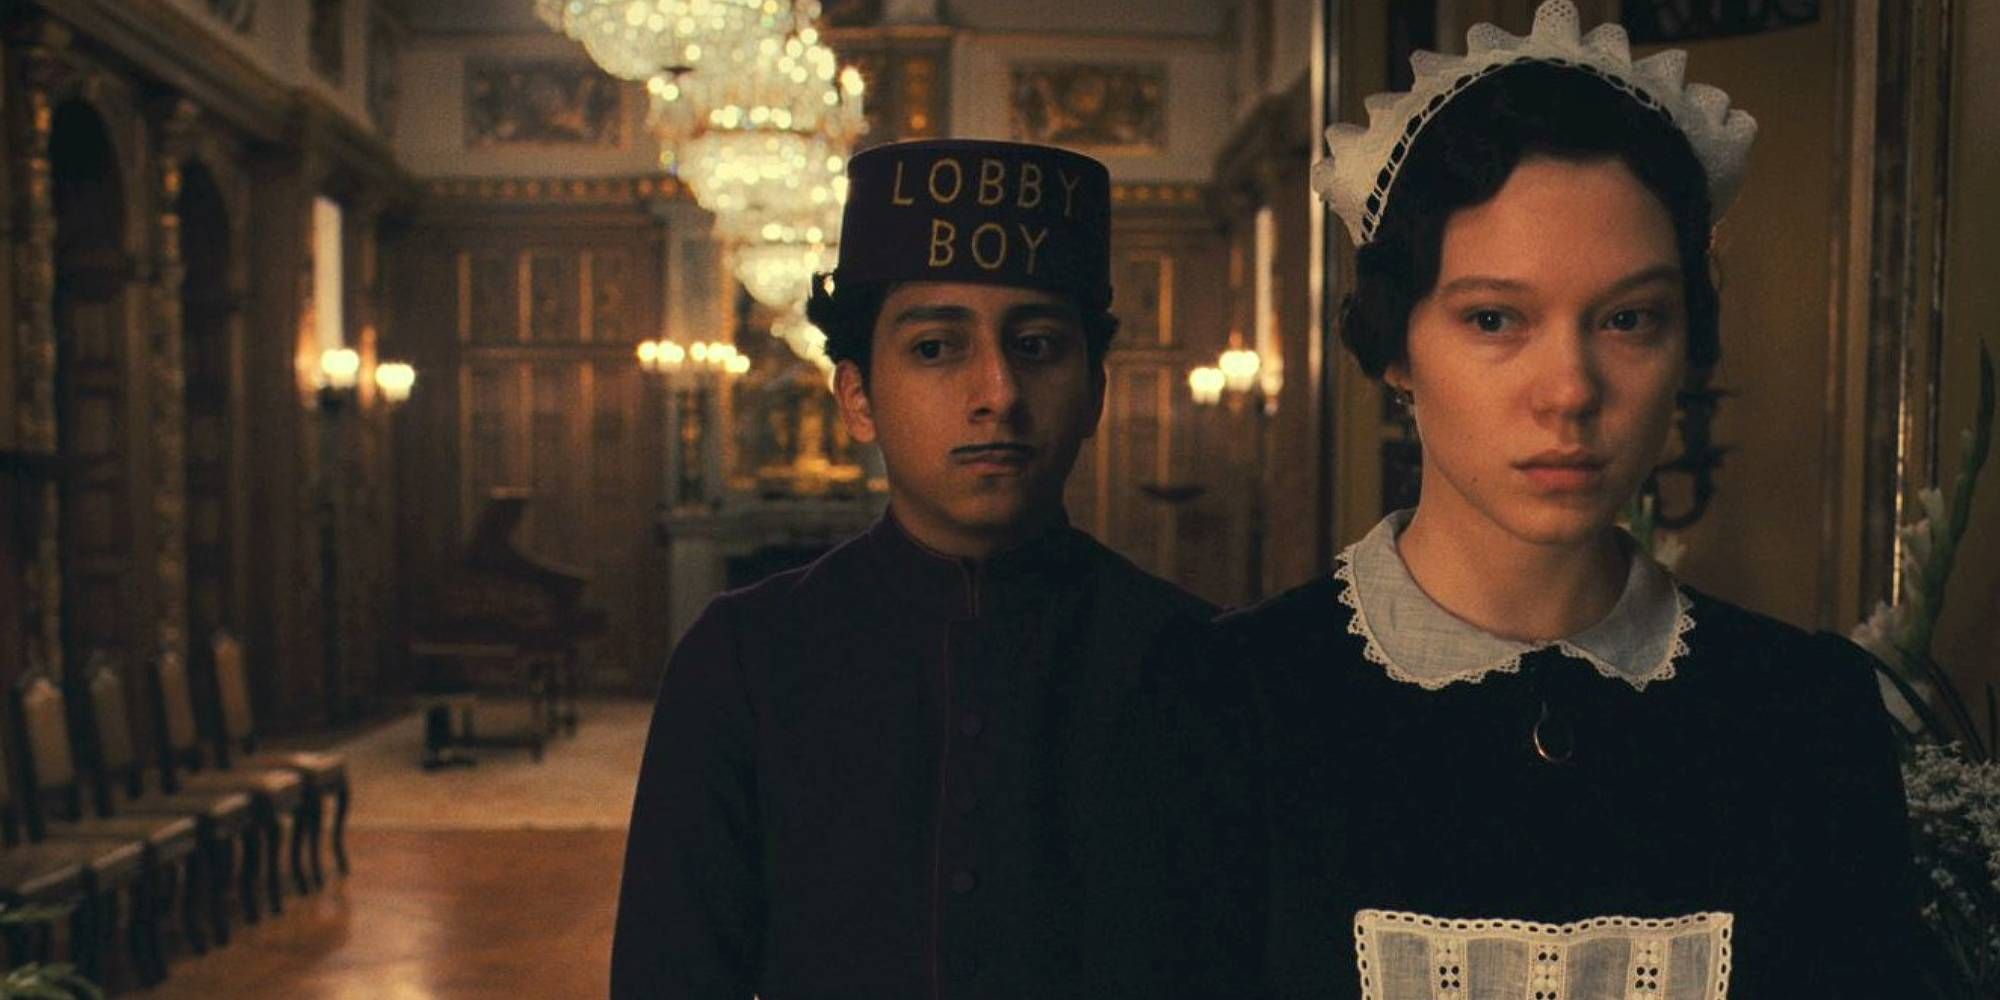 Tony Revolori standing behind Léa Seydoux in The Grand Budapest Hotel.